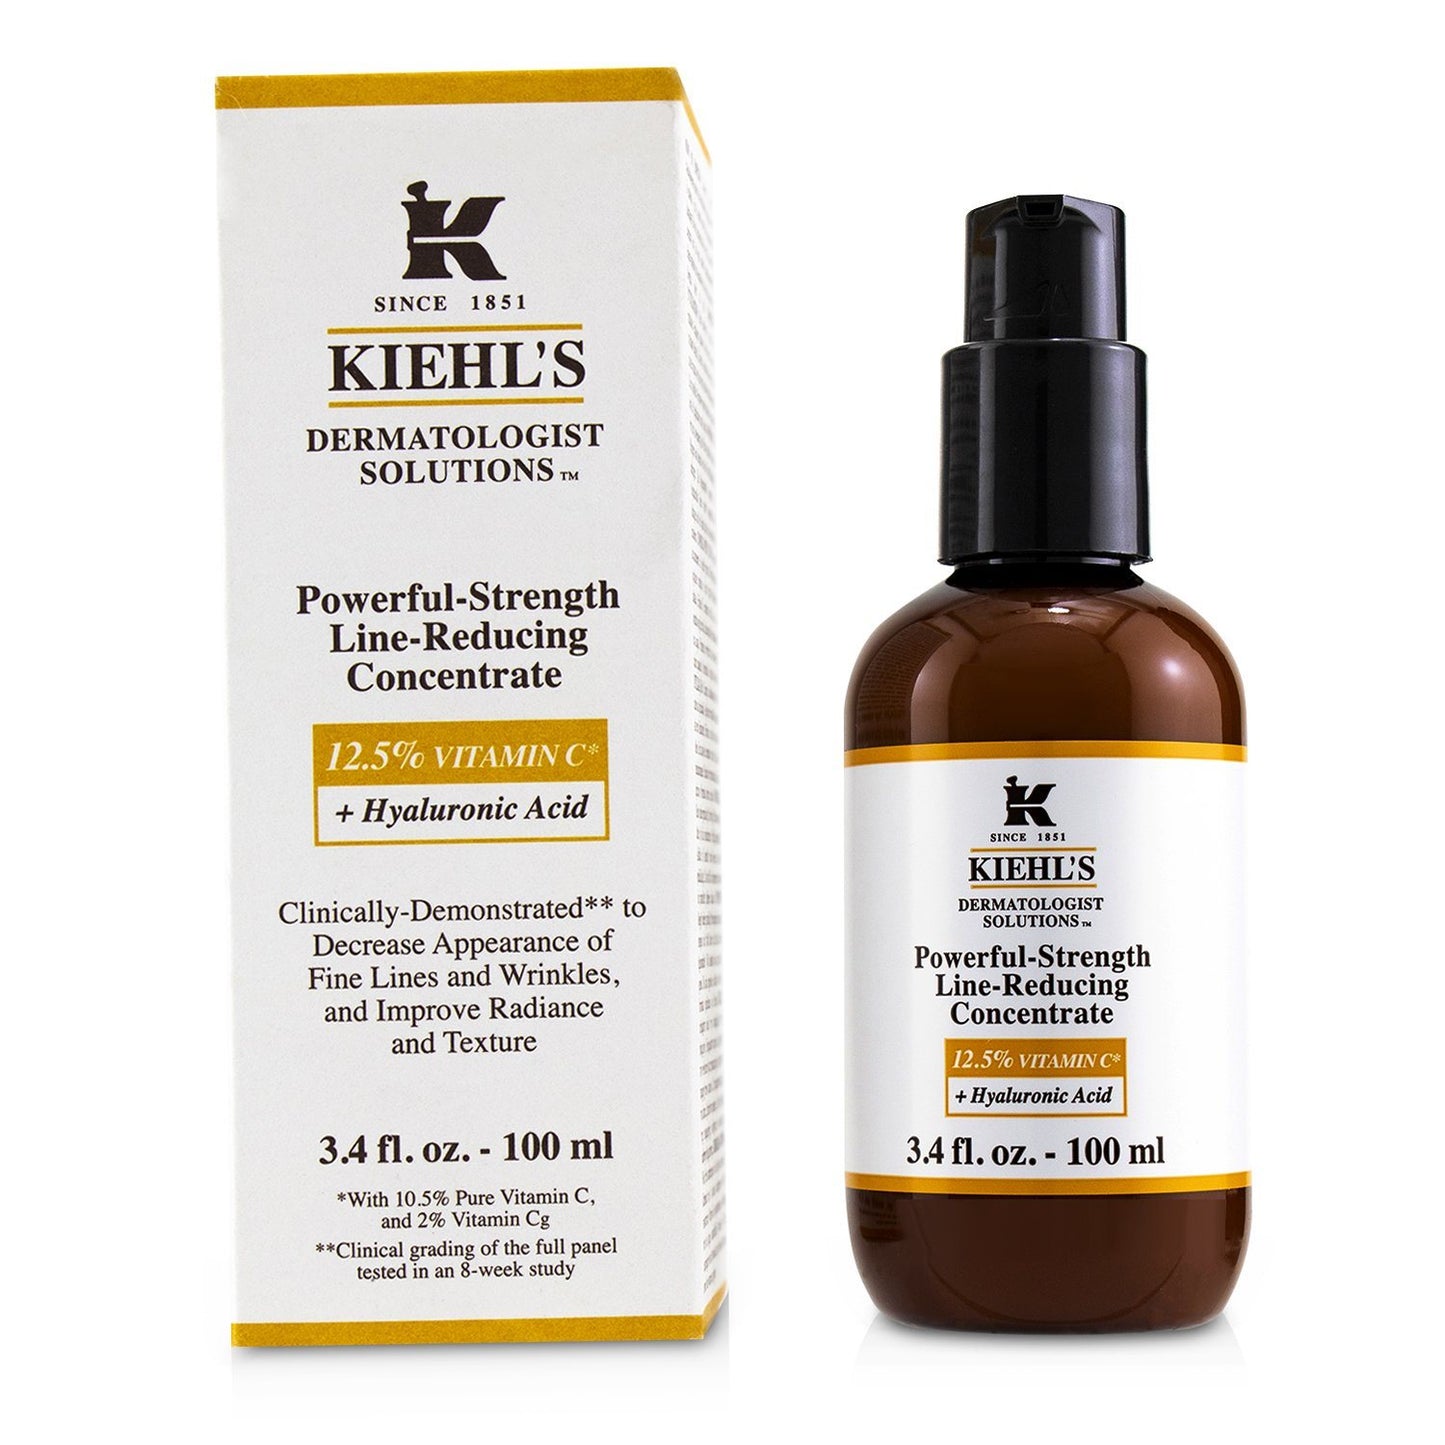 KIEHL'S - Dermatologist Solutions Powerful-Strength Line-Reducing Concentrate (With 12.5% Vitamin C + Hyaluronic Acid) S2716200/536250  100ml/3.4oz